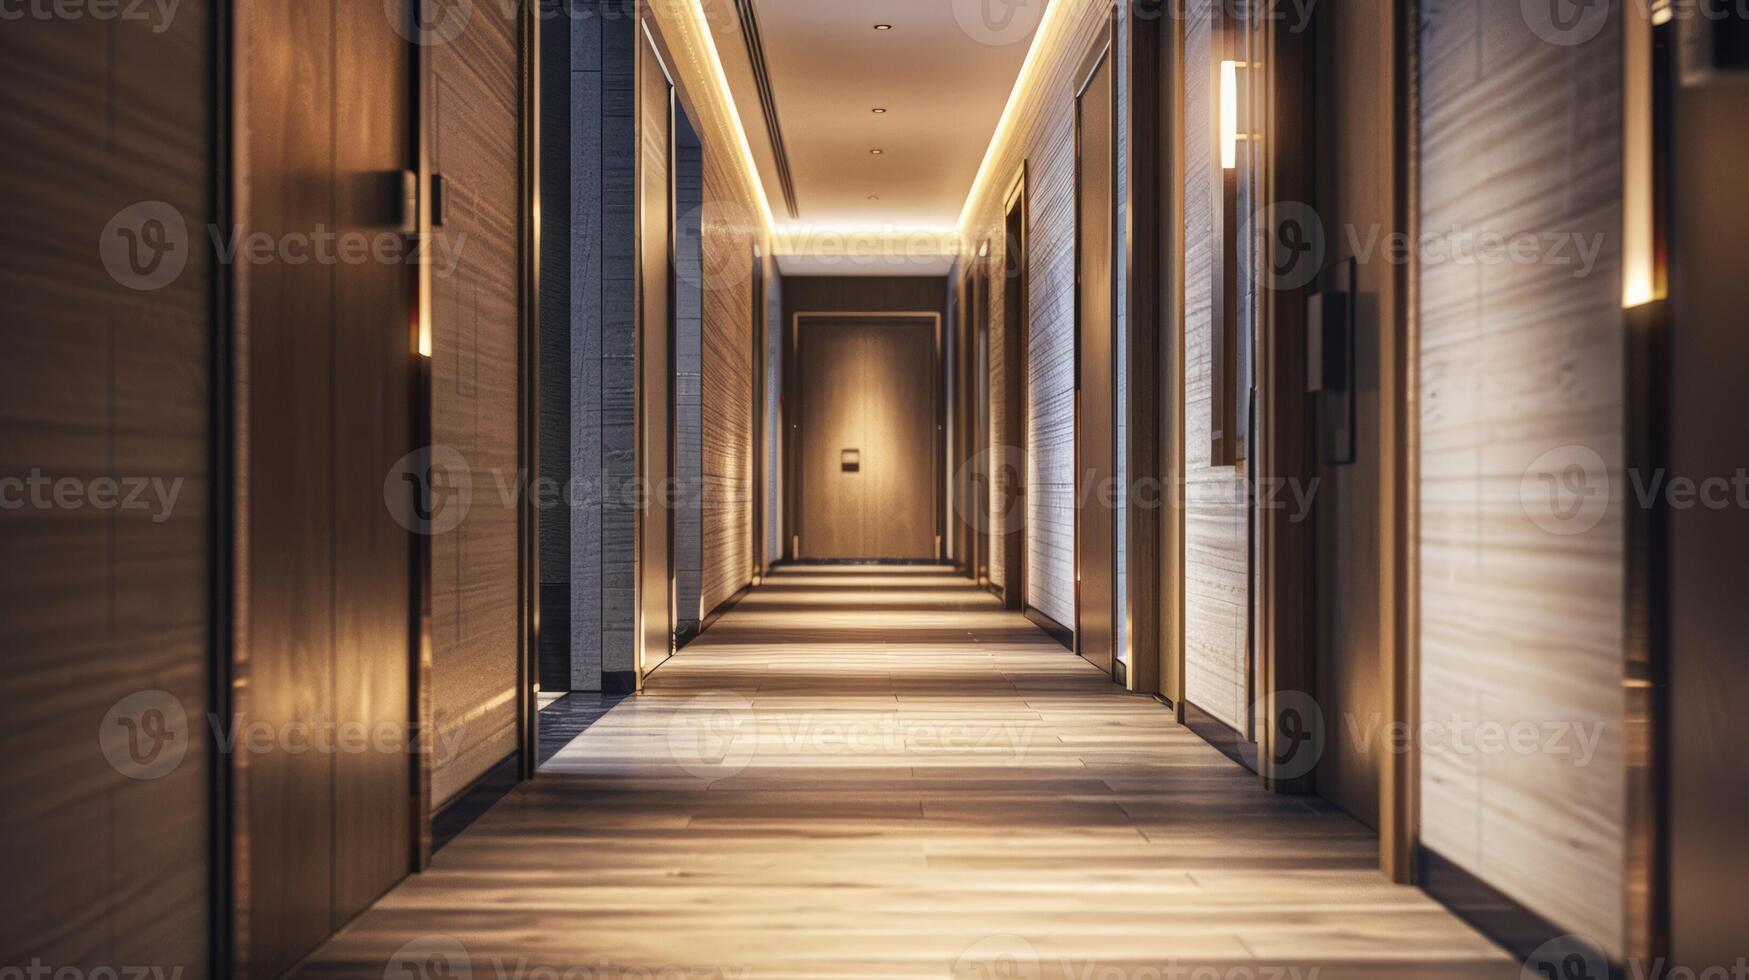 Modern hotel corridor with ambient lighting and wooden finishes, suitable for business travel or accommodation themes photo